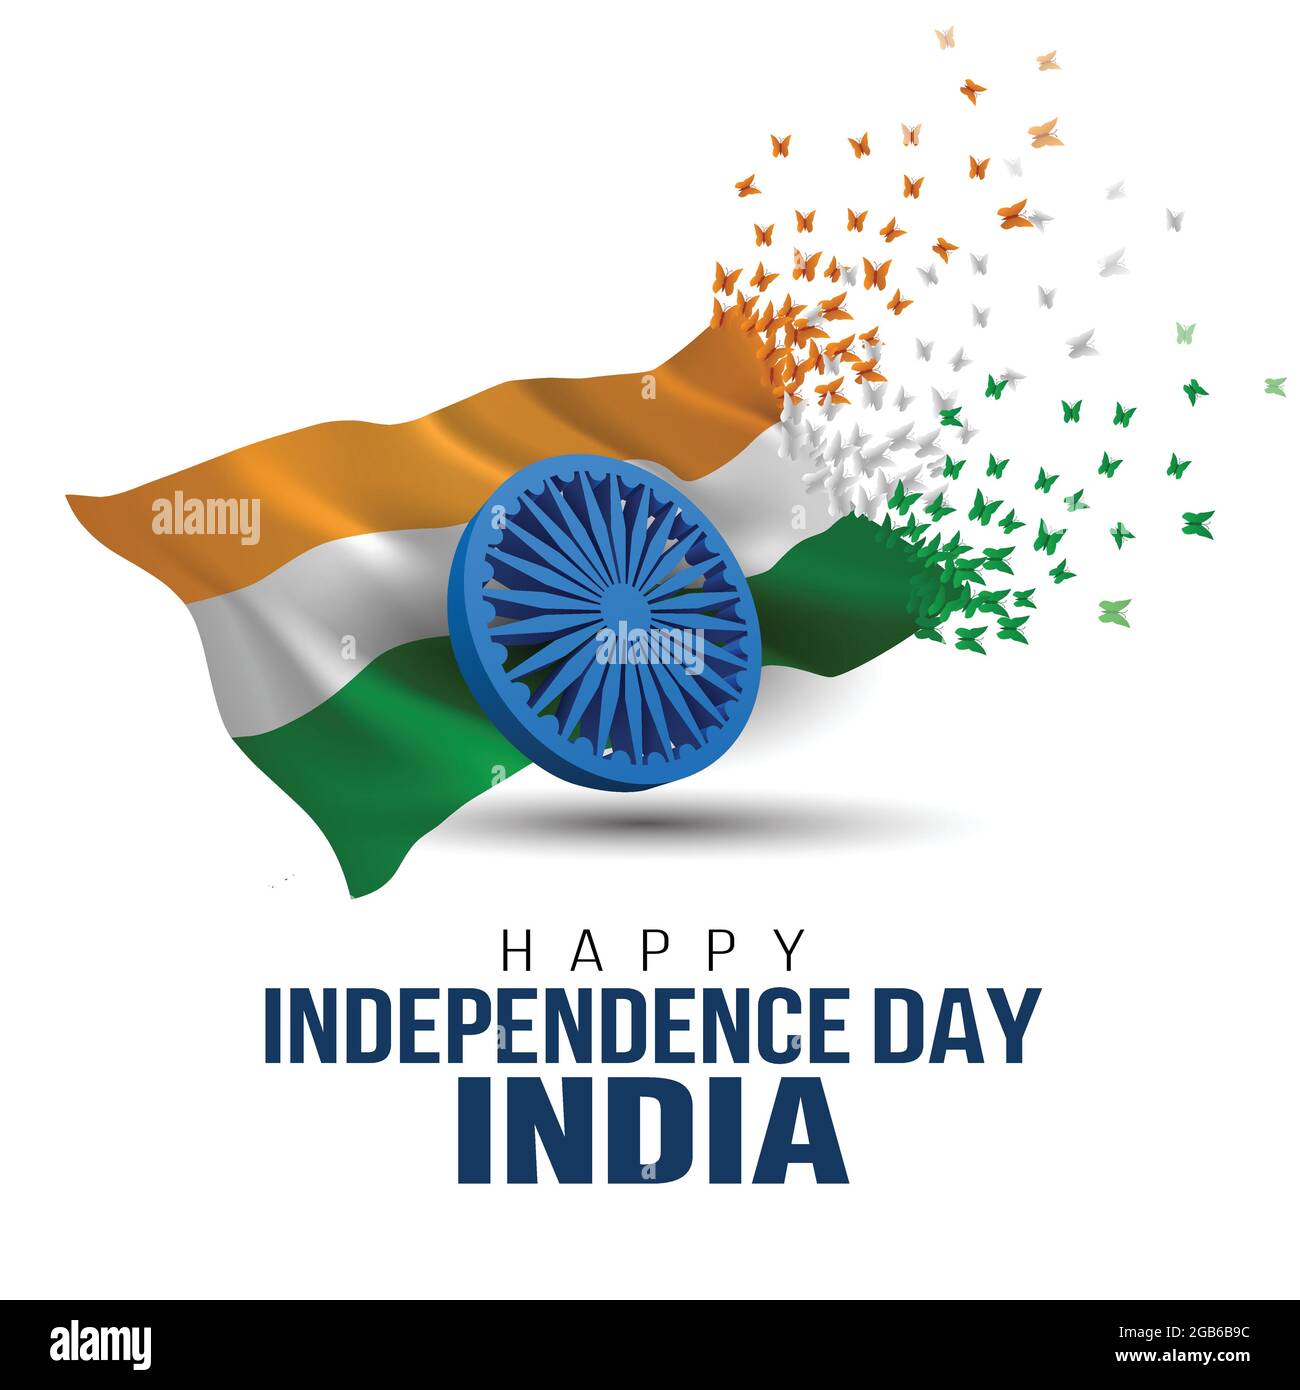 happy independence day India greetings. vector illustration design ...